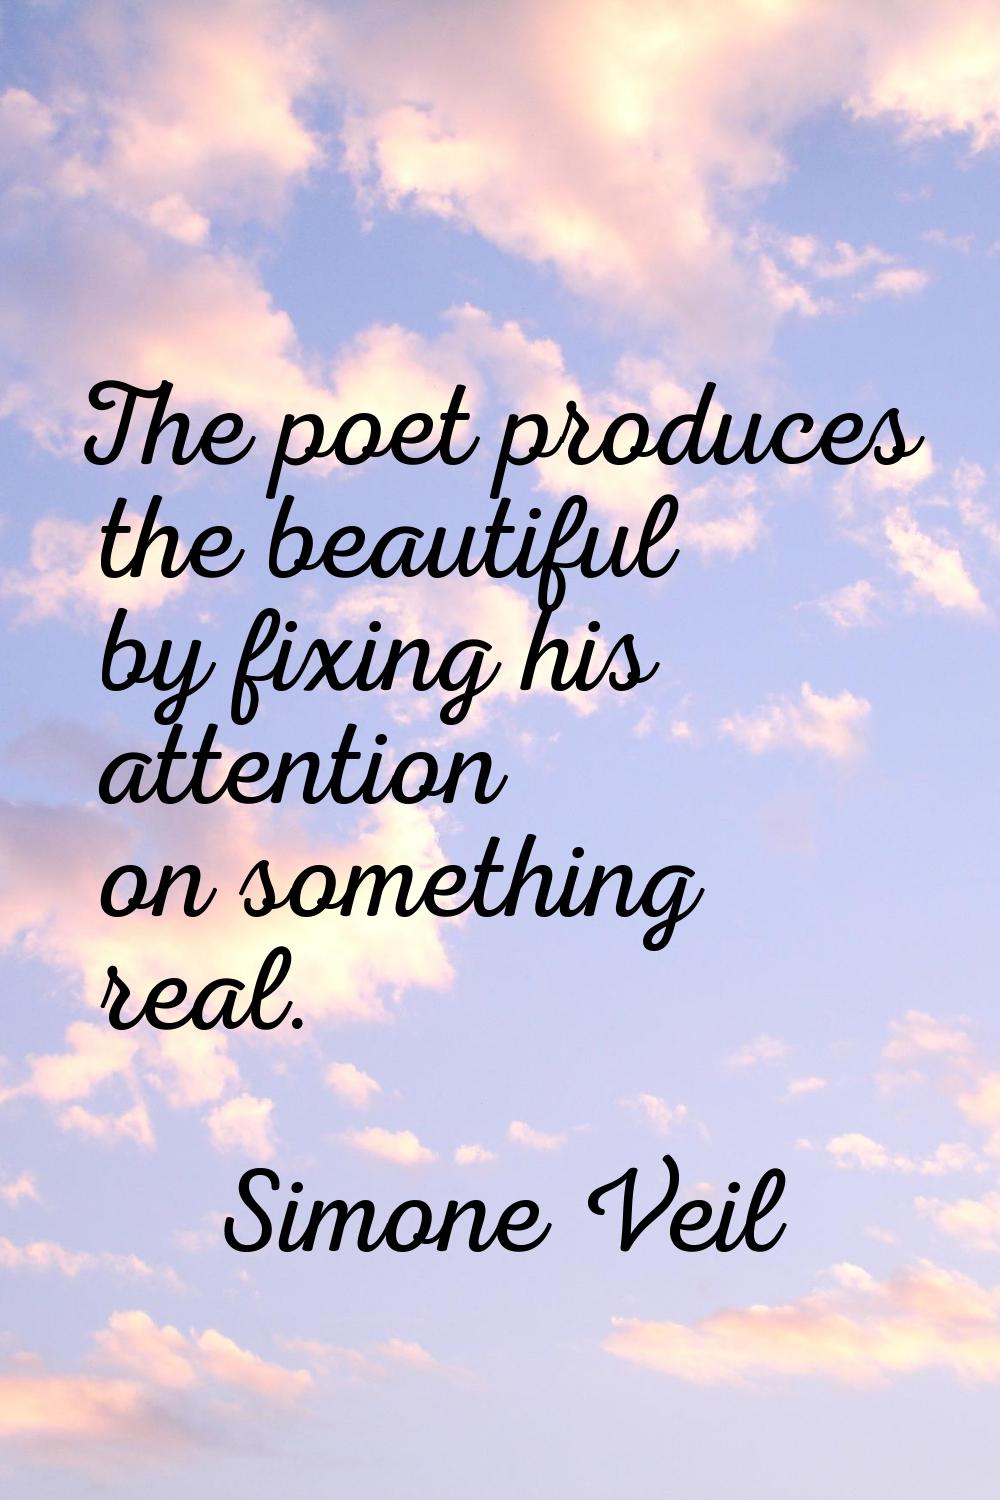 The poet produces the beautiful by fixing his attention on something real.